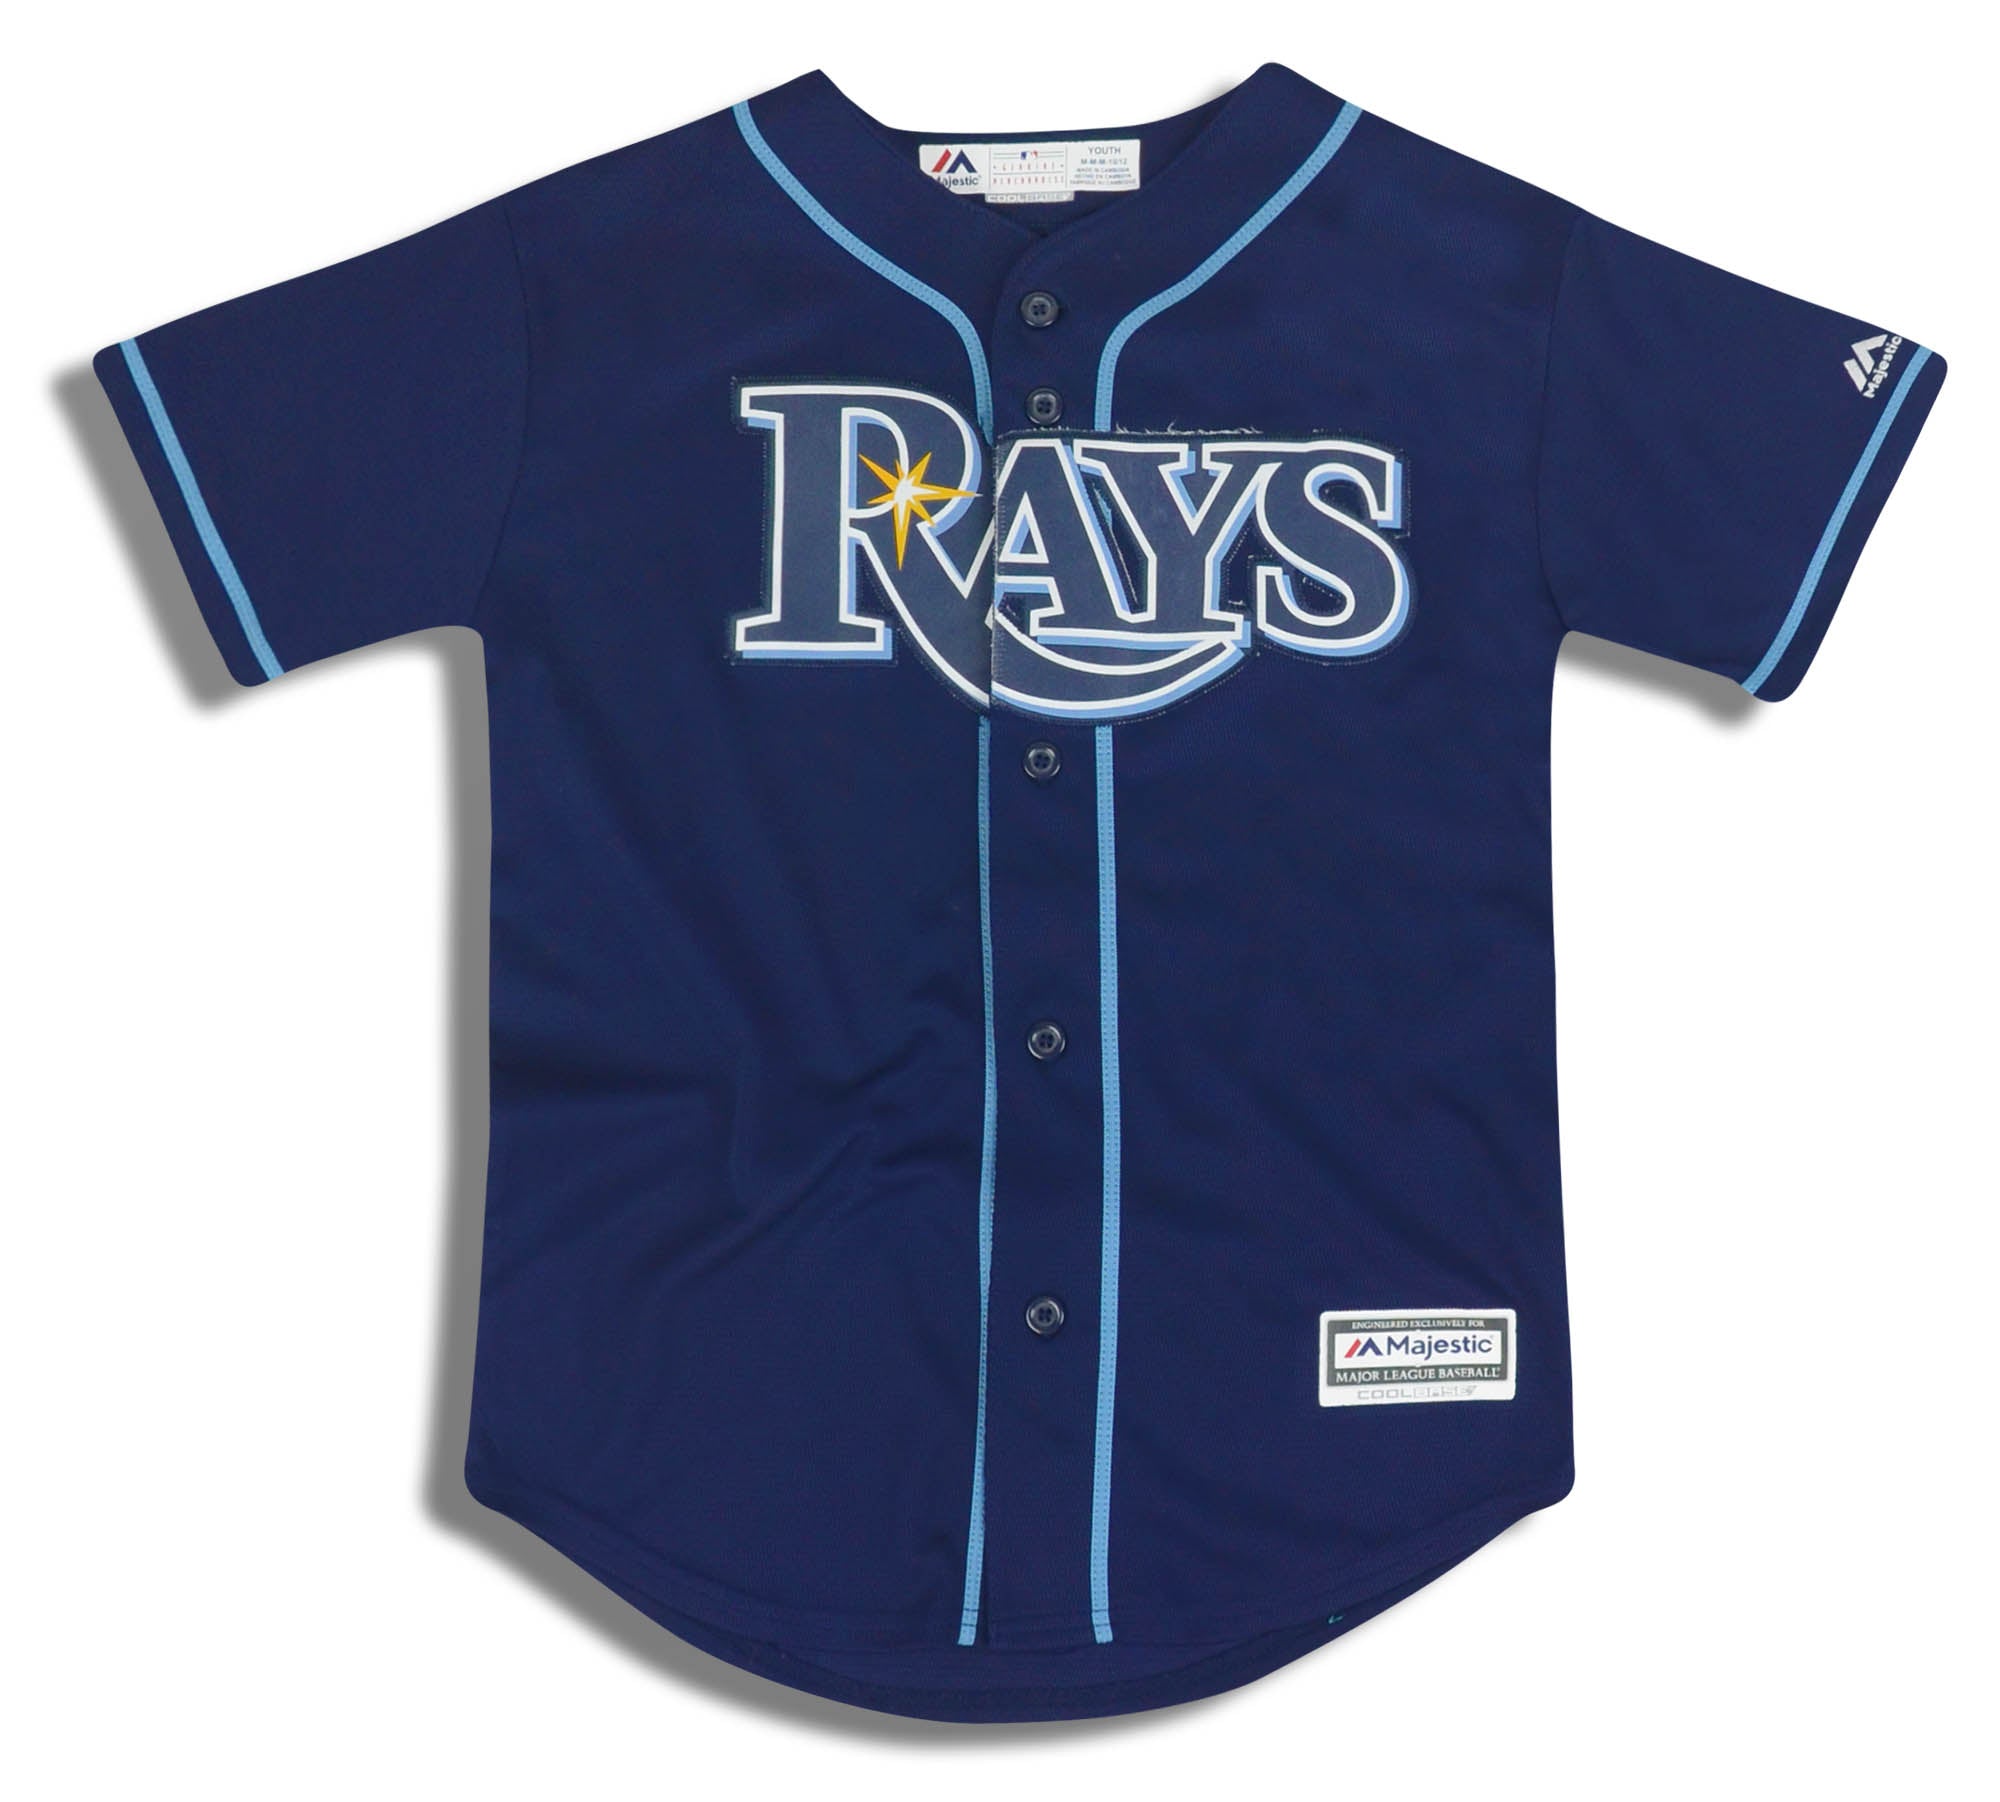 2009-14 TAMPA BAY RAYS MAJESTIC COOL BASE JERSEY (ALTERNATE) Y